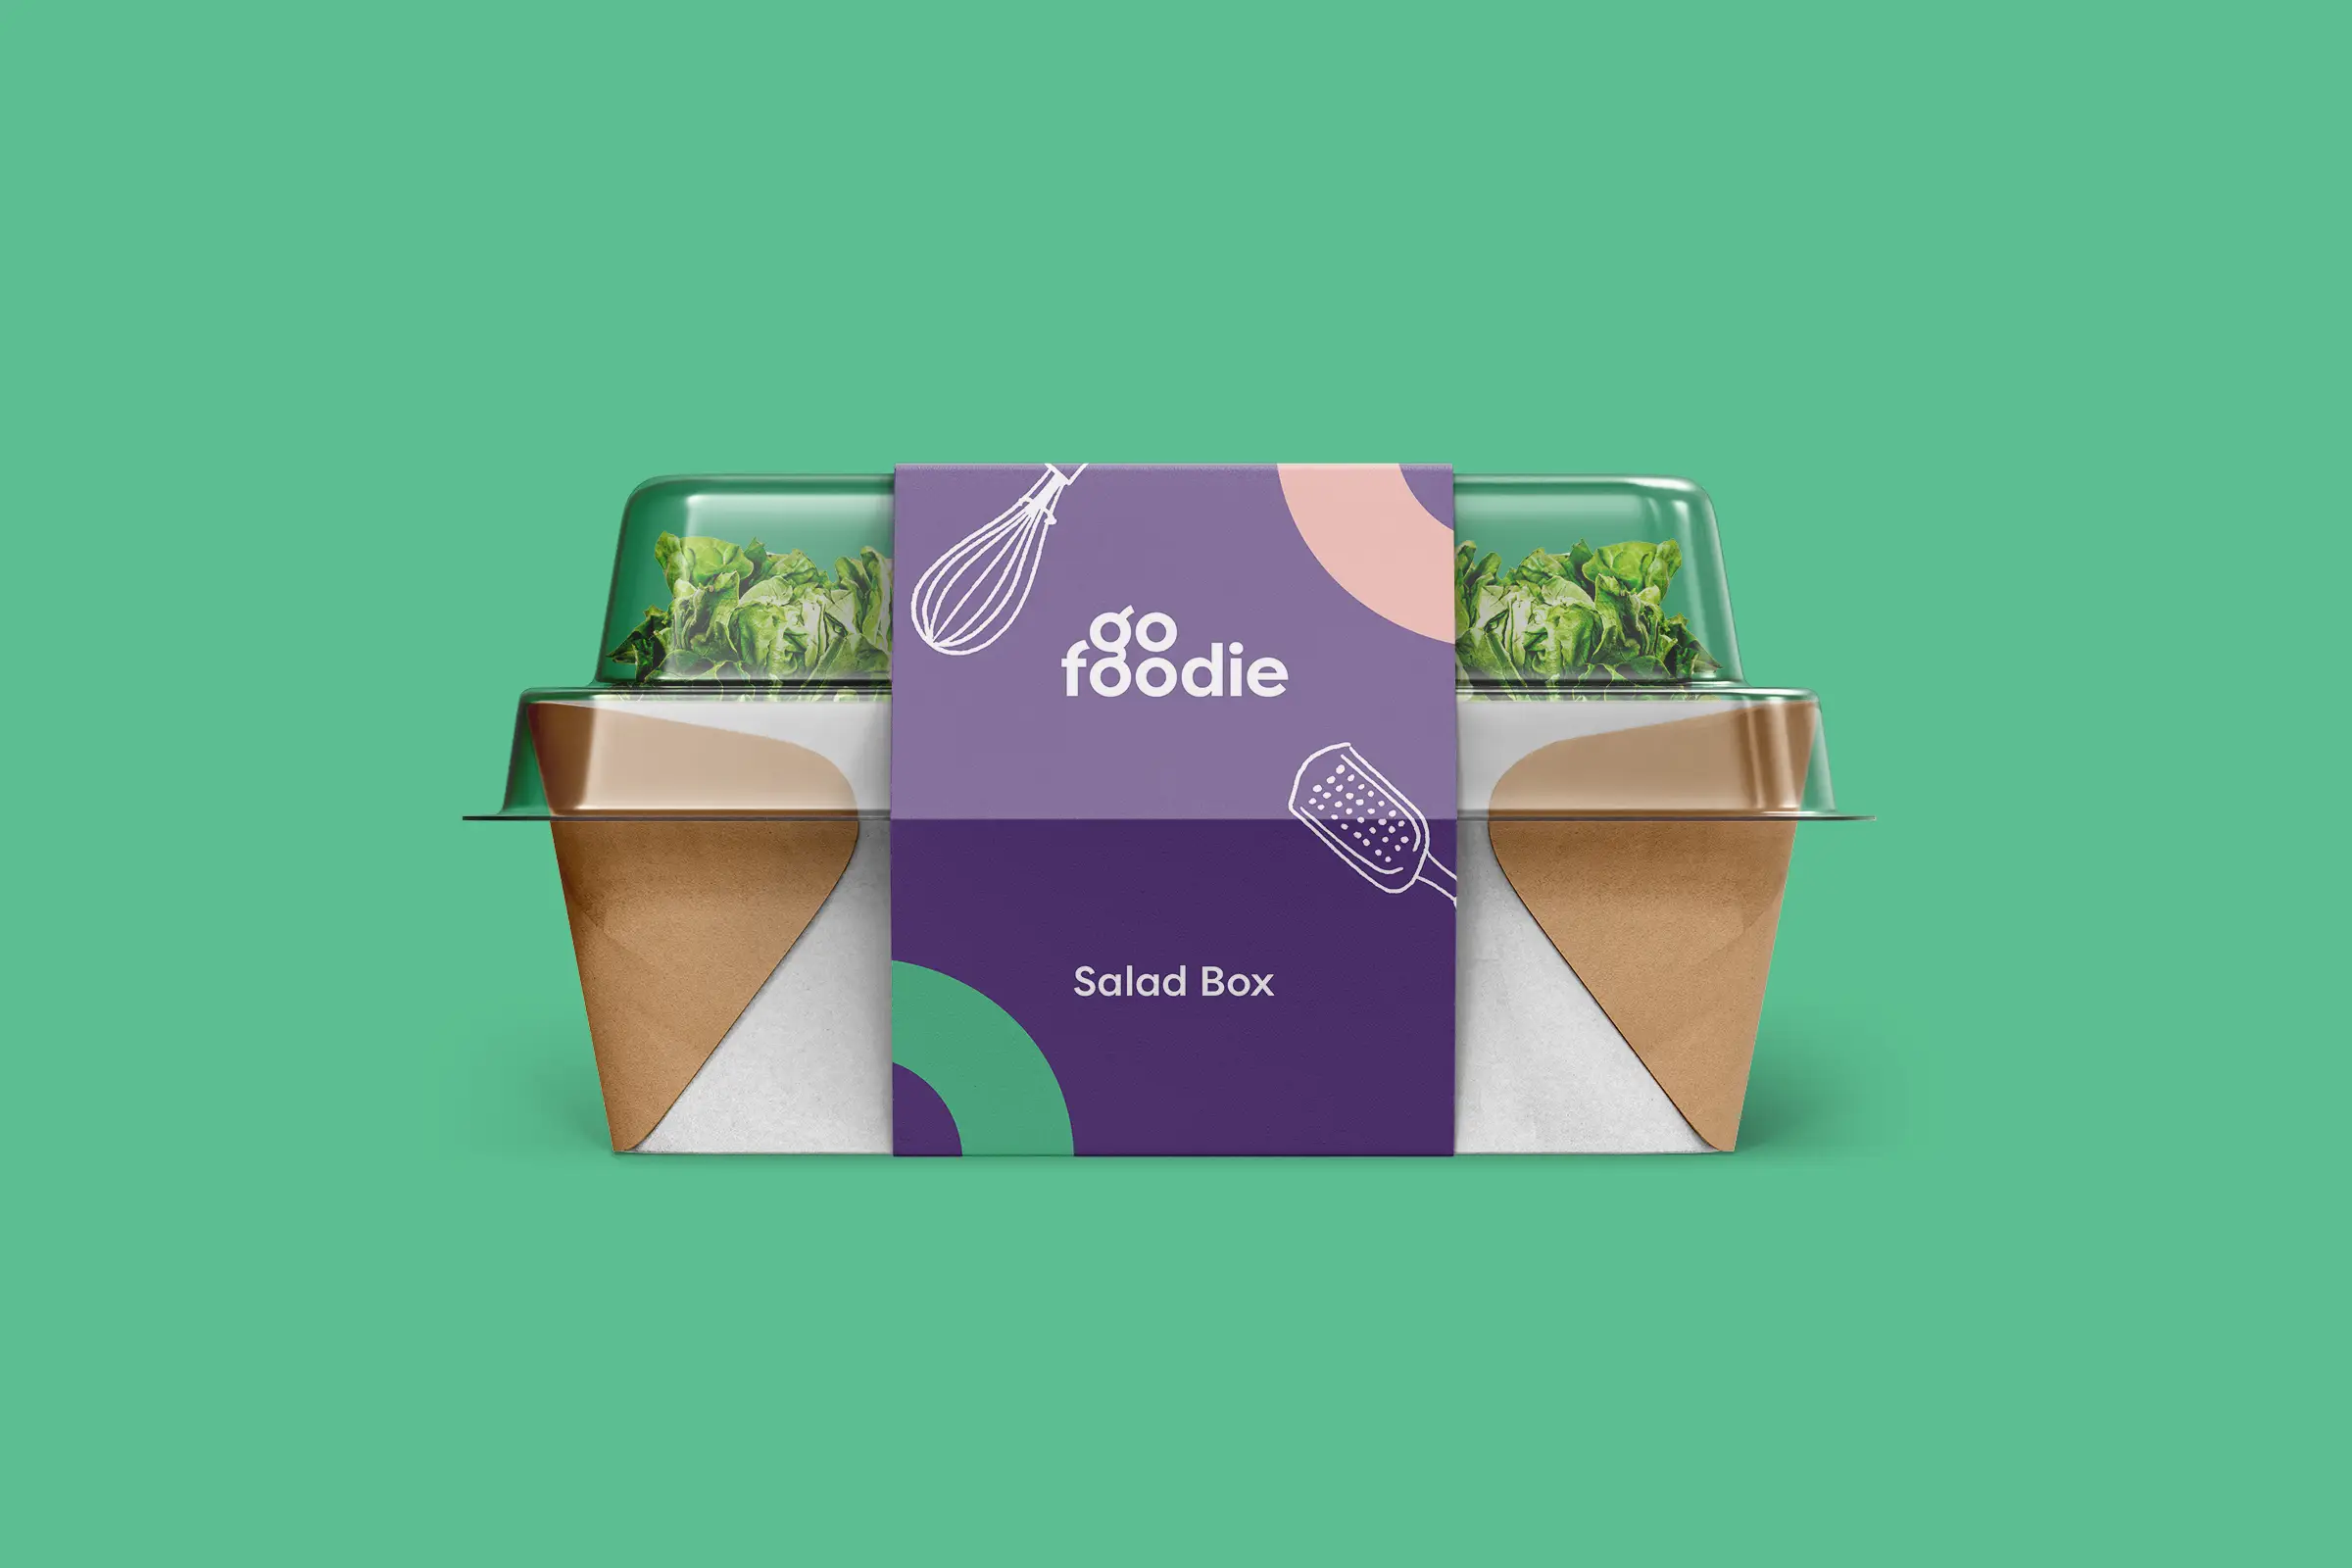 GoFoodie brand identity visual of food packaging by Ten Fathoms